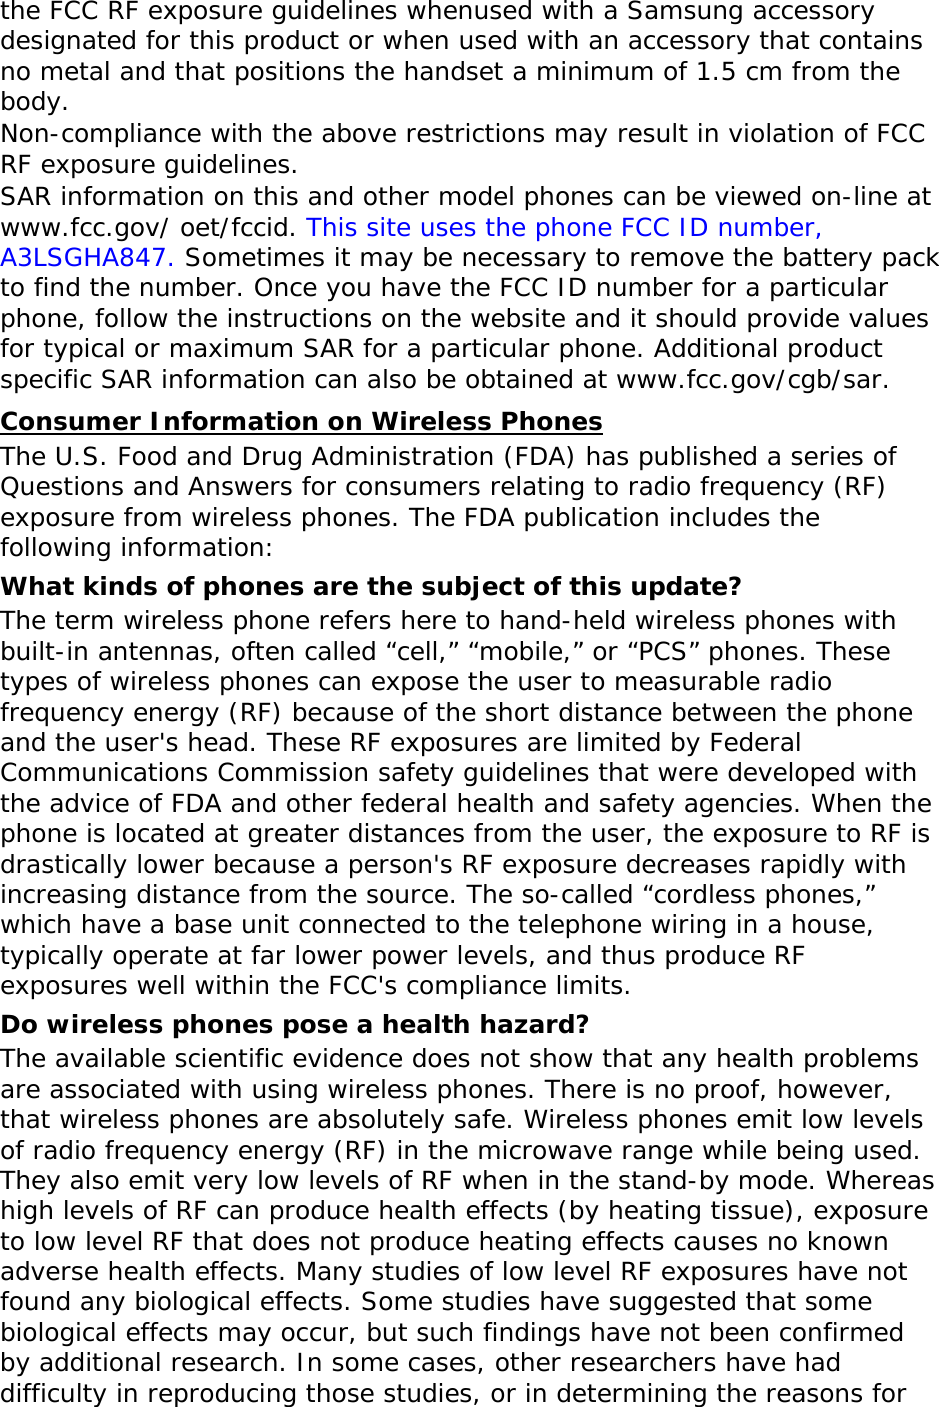 the FCC RF exposure guidelines whenused with a Samsung accessory designated for this product or when used with an accessory that contains no metal and that positions the handset a minimum of 1.5 cm from the body.  Non-compliance with the above restrictions may result in violation of FCC RF exposure guidelines. SAR information on this and other model phones can be viewed on-line at www.fcc.gov/ oet/fccid. This site uses the phone FCC ID number, A3LSGHA847. Sometimes it may be necessary to remove the battery pack to find the number. Once you have the FCC ID number for a particular phone, follow the instructions on the website and it should provide values for typical or maximum SAR for a particular phone. Additional product specific SAR information can also be obtained at www.fcc.gov/cgb/sar. Consumer Information on Wireless Phones The U.S. Food and Drug Administration (FDA) has published a series of Questions and Answers for consumers relating to radio frequency (RF) exposure from wireless phones. The FDA publication includes the following information: What kinds of phones are the subject of this update? The term wireless phone refers here to hand-held wireless phones with built-in antennas, often called “cell,” “mobile,” or “PCS” phones. These types of wireless phones can expose the user to measurable radio frequency energy (RF) because of the short distance between the phone and the user&apos;s head. These RF exposures are limited by Federal Communications Commission safety guidelines that were developed with the advice of FDA and other federal health and safety agencies. When the phone is located at greater distances from the user, the exposure to RF is drastically lower because a person&apos;s RF exposure decreases rapidly with increasing distance from the source. The so-called “cordless phones,” which have a base unit connected to the telephone wiring in a house, typically operate at far lower power levels, and thus produce RF exposures well within the FCC&apos;s compliance limits. Do wireless phones pose a health hazard? The available scientific evidence does not show that any health problems are associated with using wireless phones. There is no proof, however, that wireless phones are absolutely safe. Wireless phones emit low levels of radio frequency energy (RF) in the microwave range while being used. They also emit very low levels of RF when in the stand-by mode. Whereas high levels of RF can produce health effects (by heating tissue), exposure to low level RF that does not produce heating effects causes no known adverse health effects. Many studies of low level RF exposures have not found any biological effects. Some studies have suggested that some biological effects may occur, but such findings have not been confirmed by additional research. In some cases, other researchers have had difficulty in reproducing those studies, or in determining the reasons for 